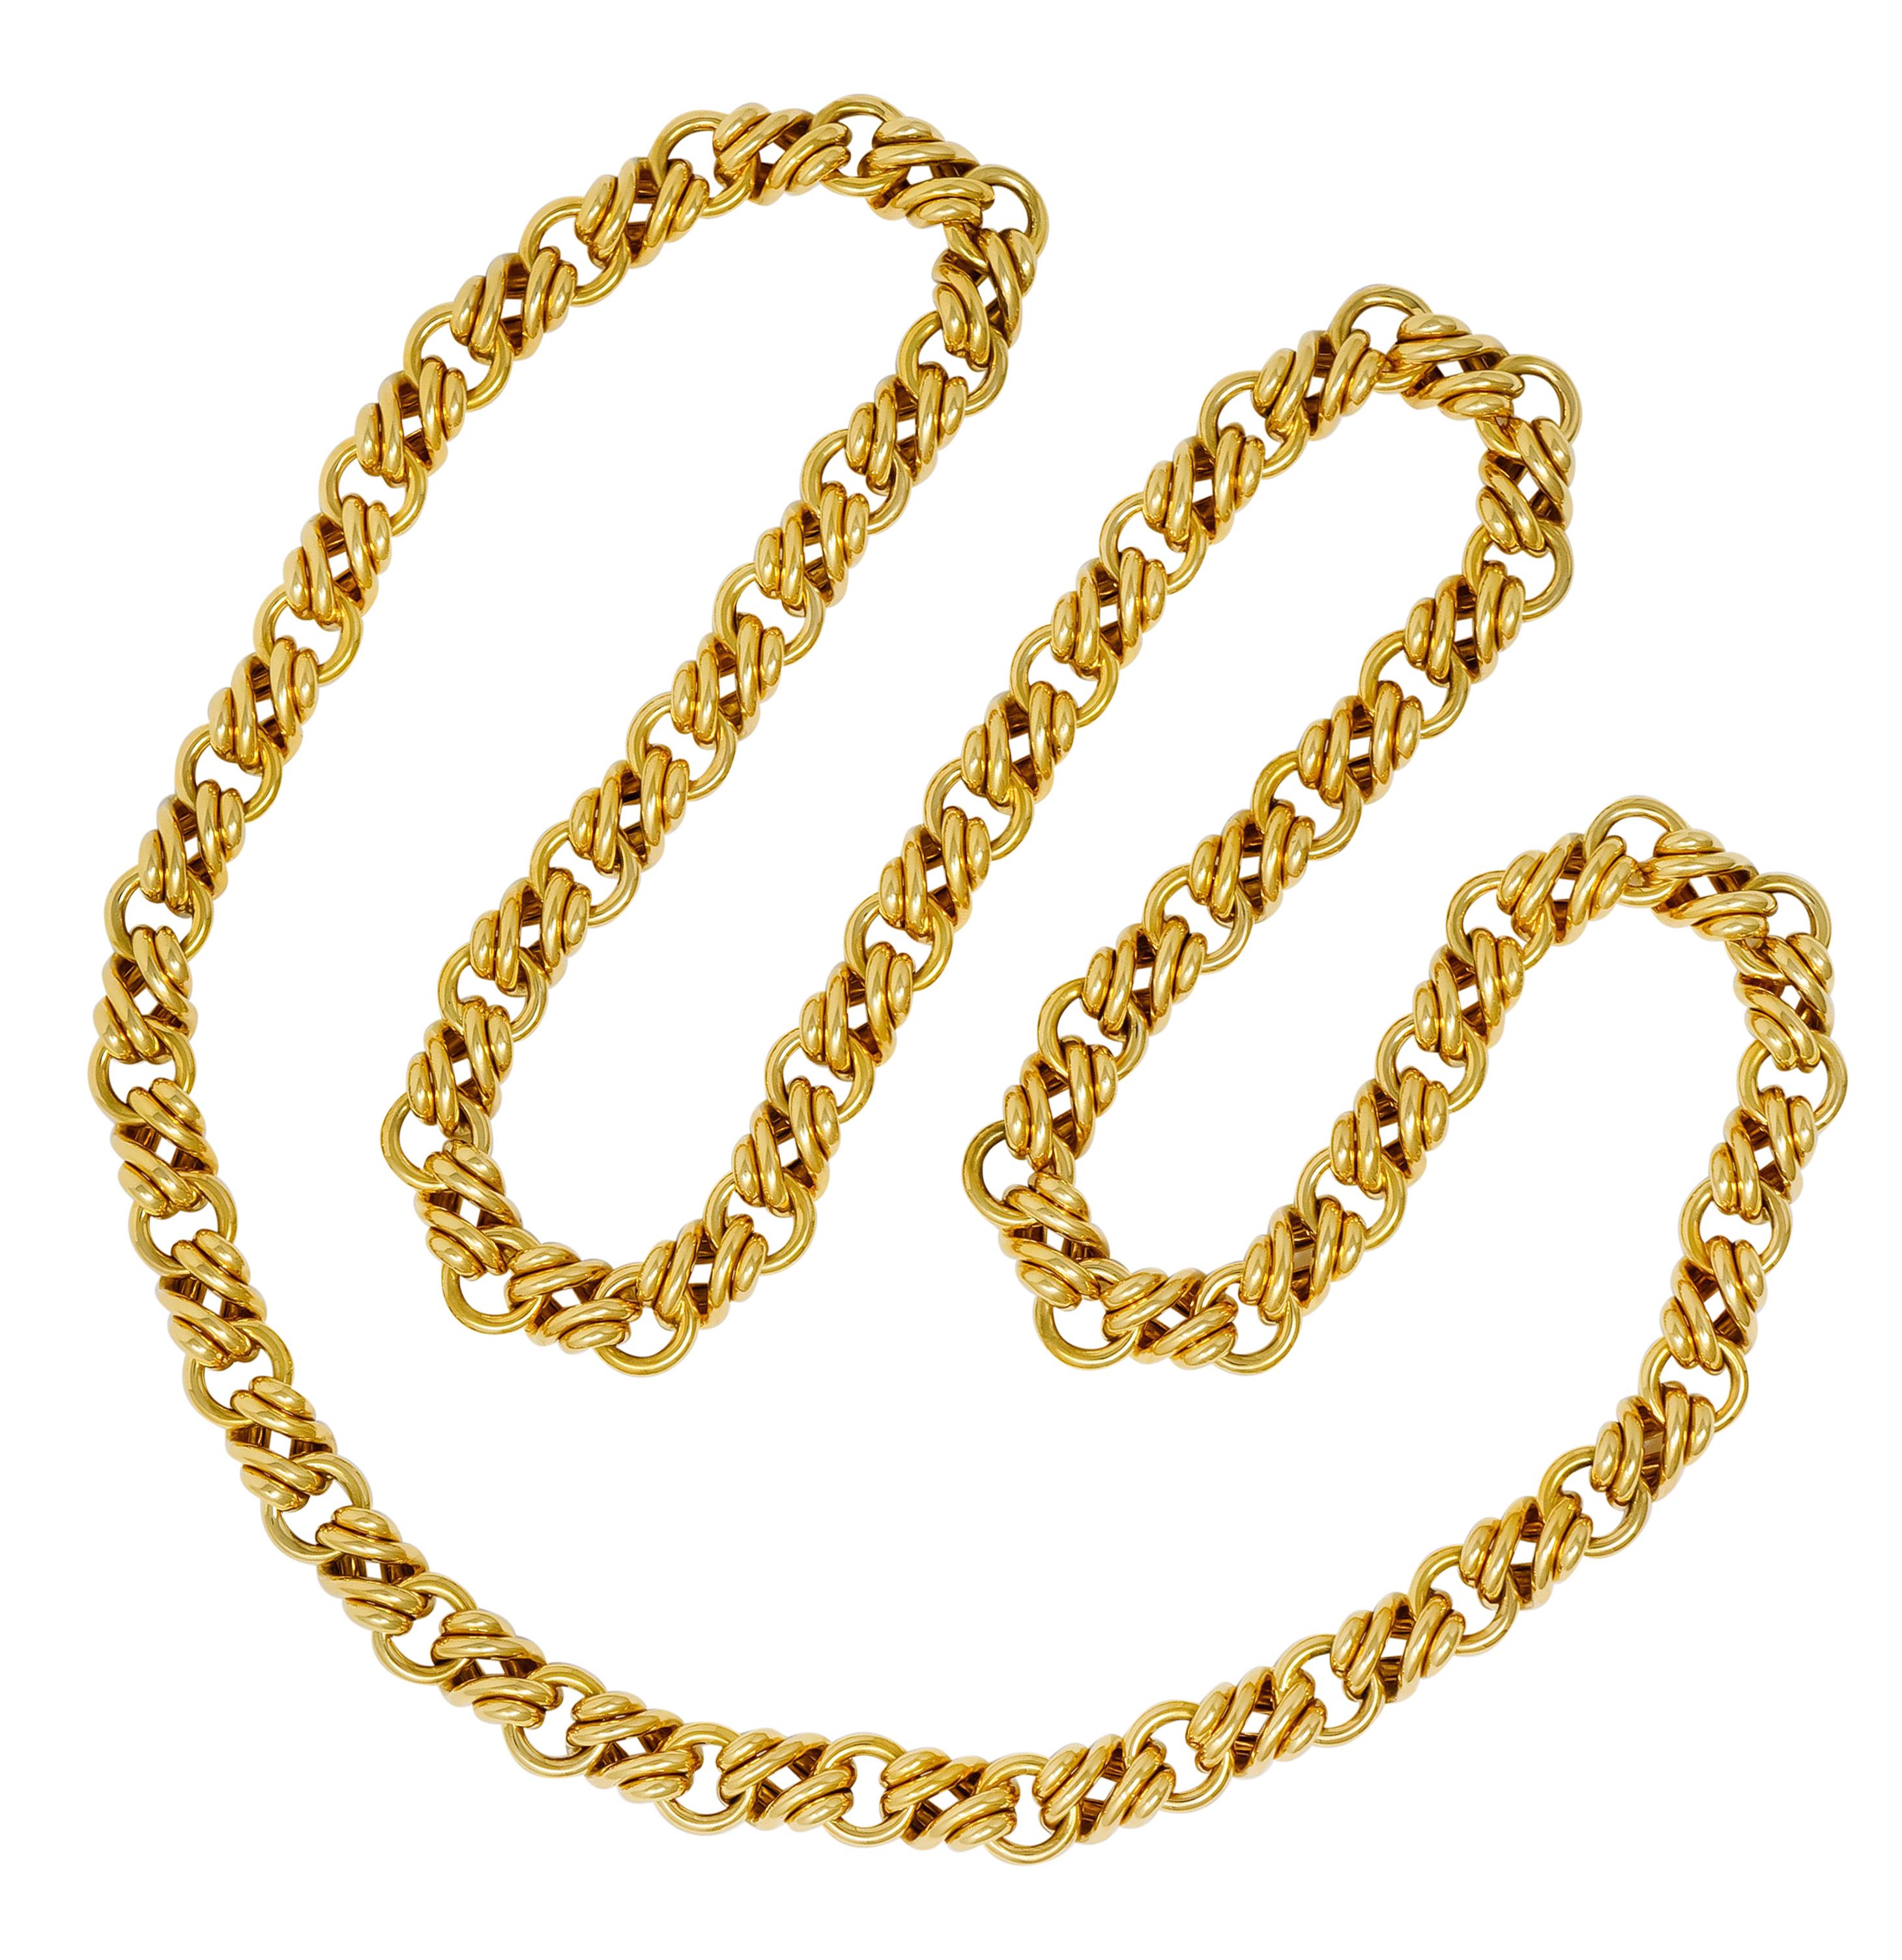 Chain style necklace comprised of oval links alternating with curbed links

Featuring a bright polished finish

Completed by a concealed clasp and two figure eight safeties

Fully signed Tiffany & Co. Germany

Stamped 18kt for 18 karat gold

Length: